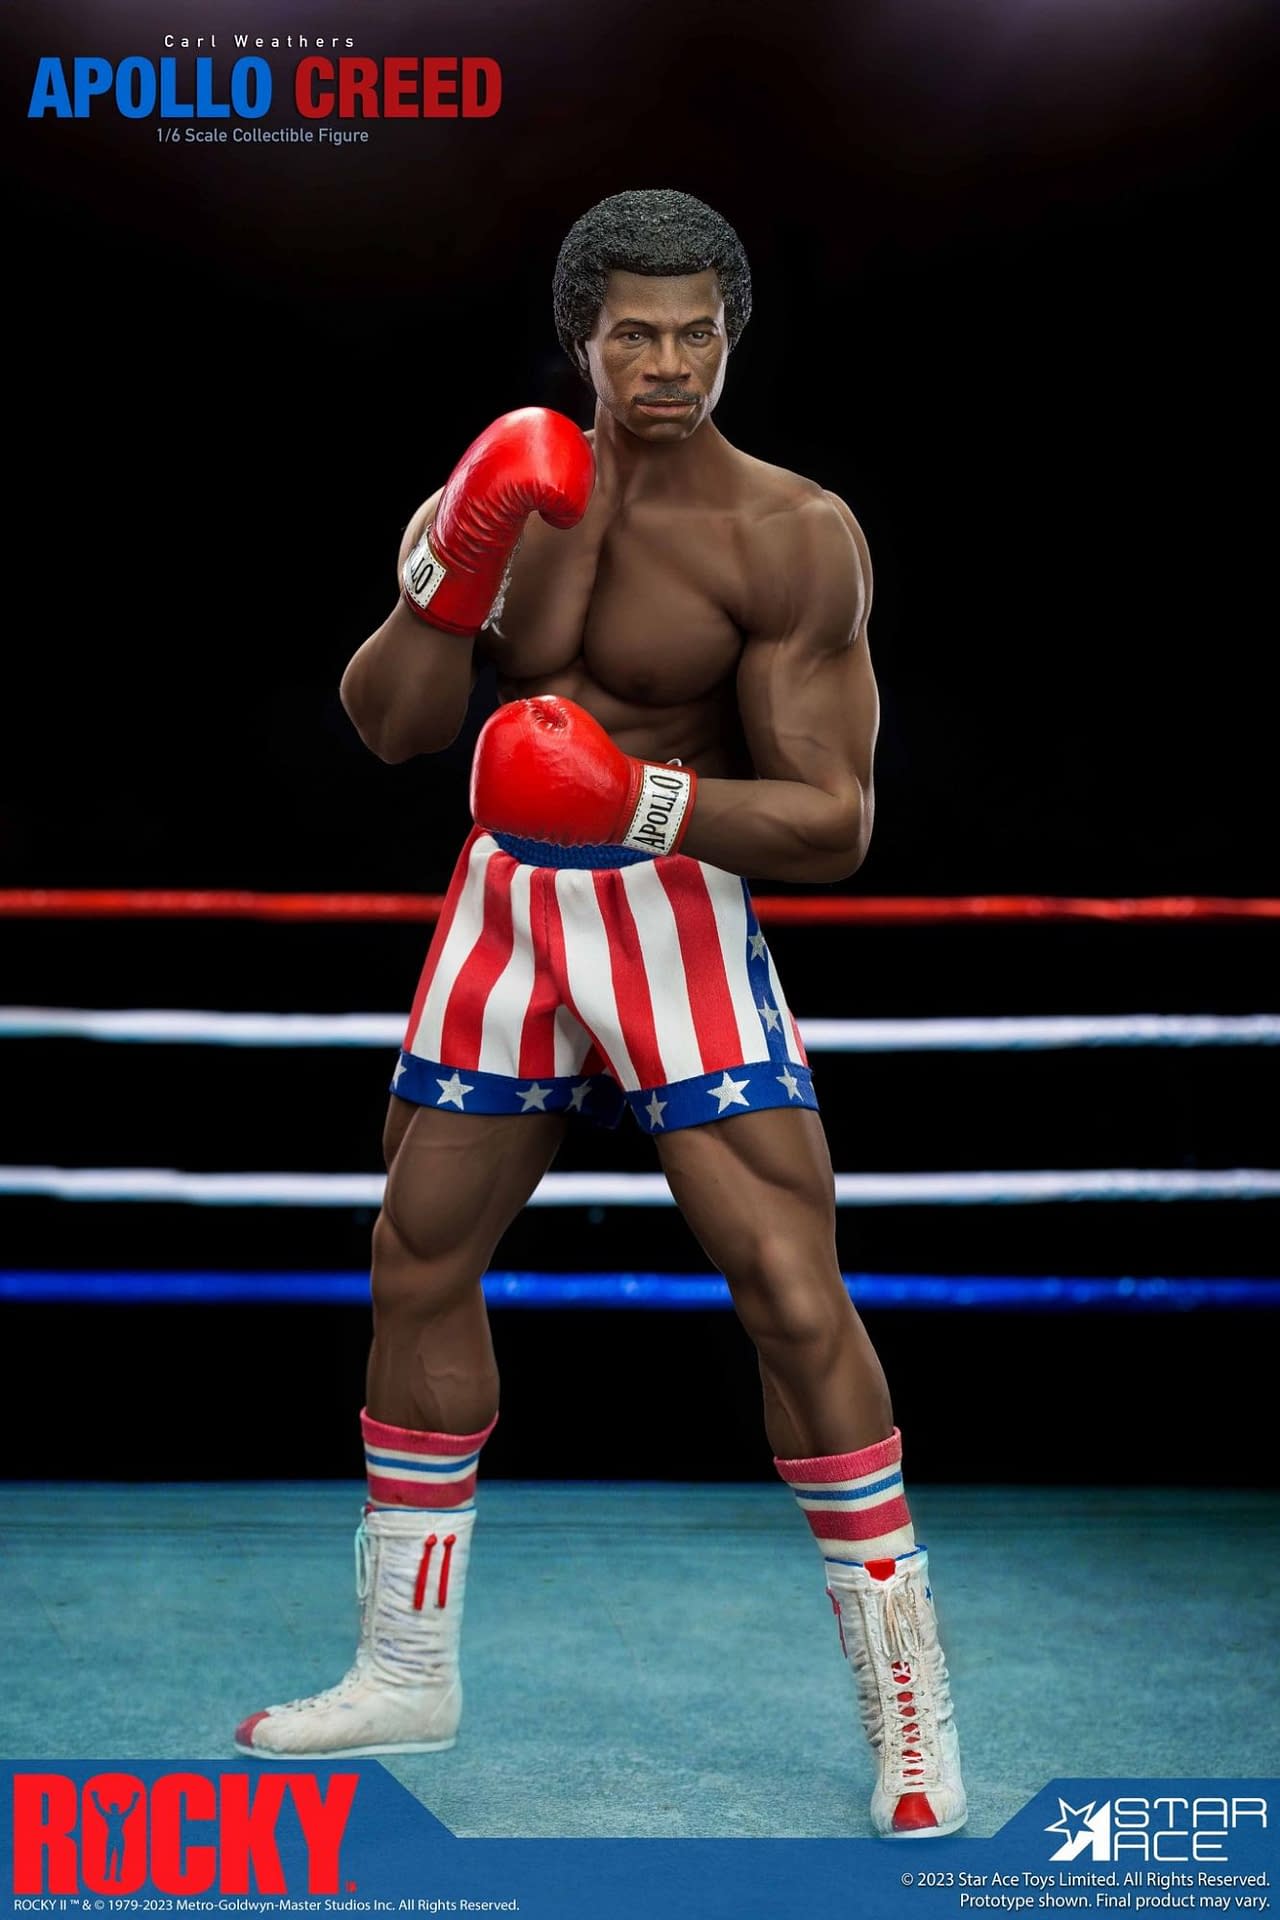 Apollo Creed Gets a KO with Star Ace Toys Latest Rocky Figure 